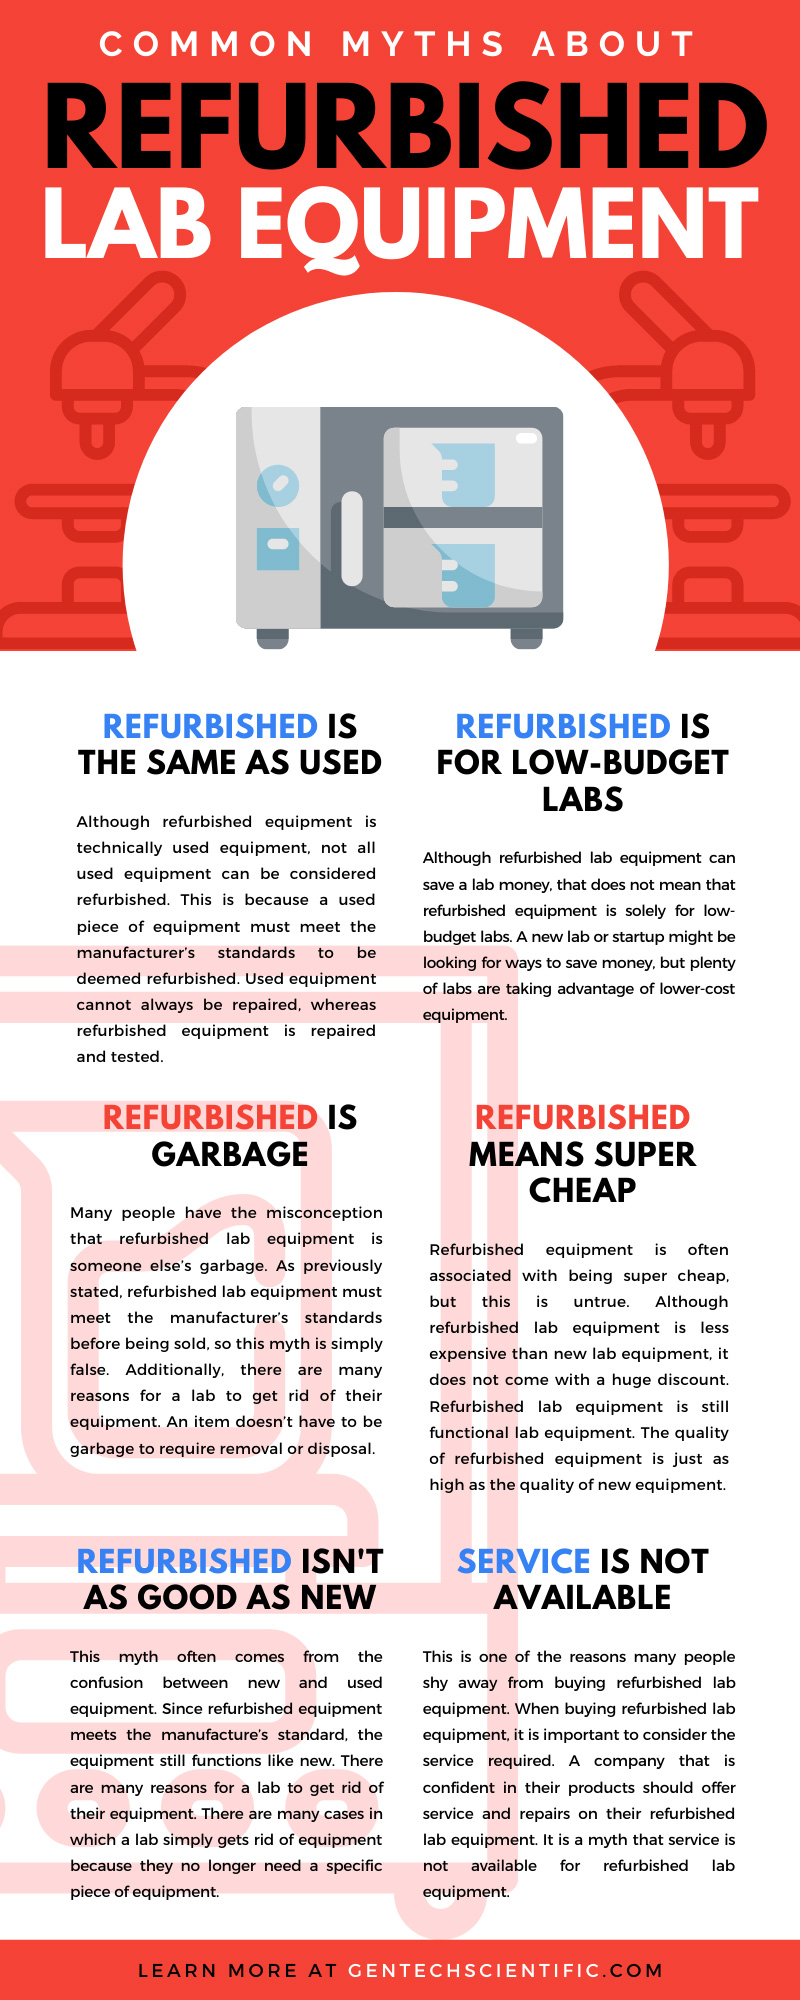 Common Myths About Refurbished Lab Equipment in an Infographic